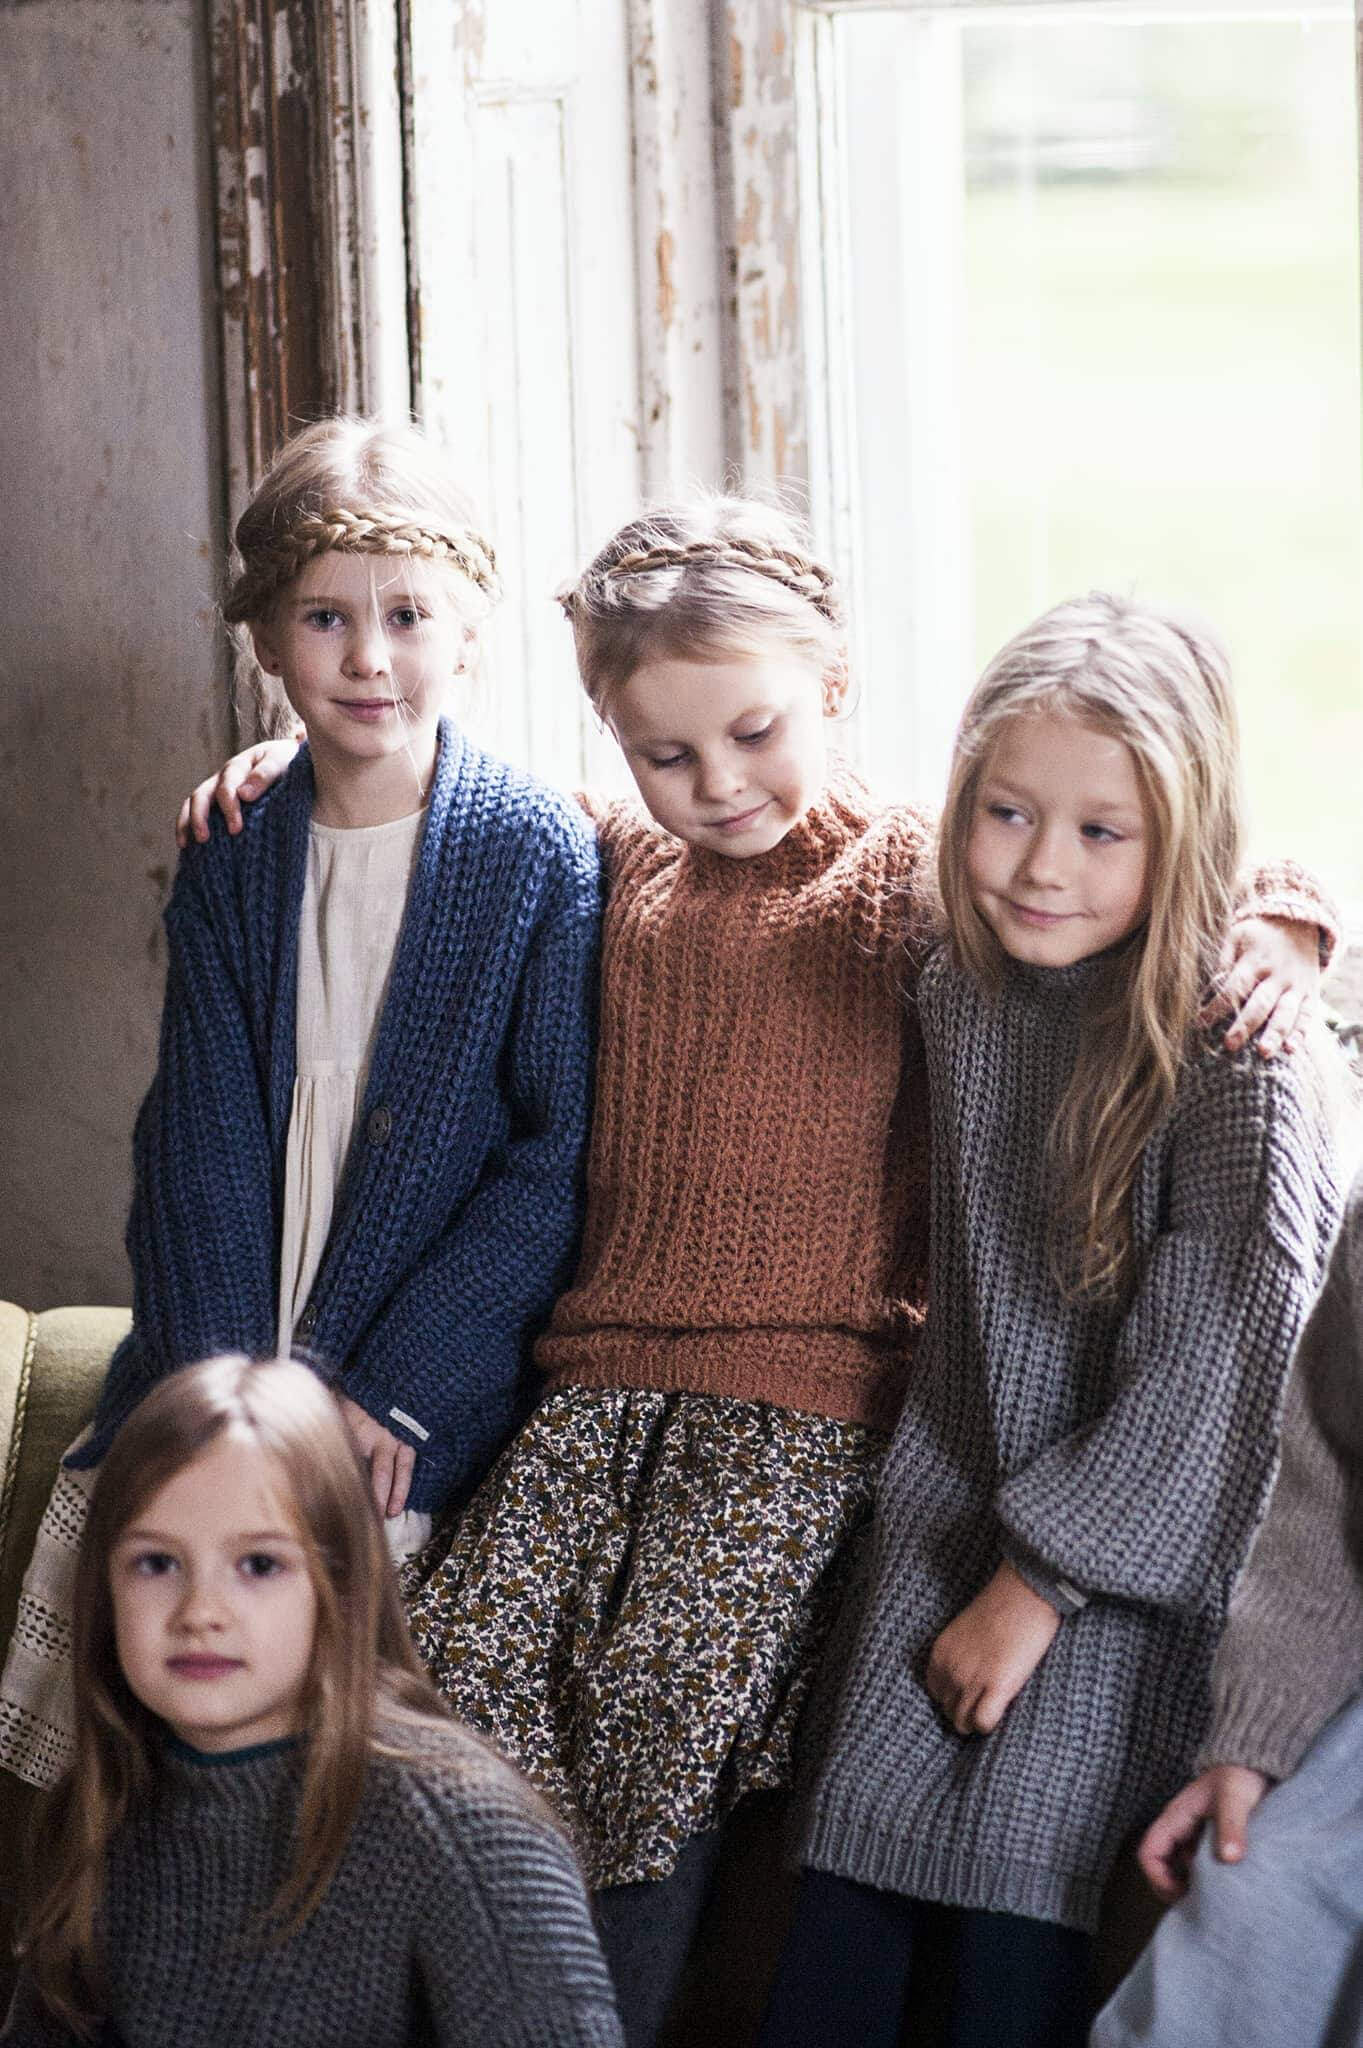 chunky cardigans for the little ones and mum too